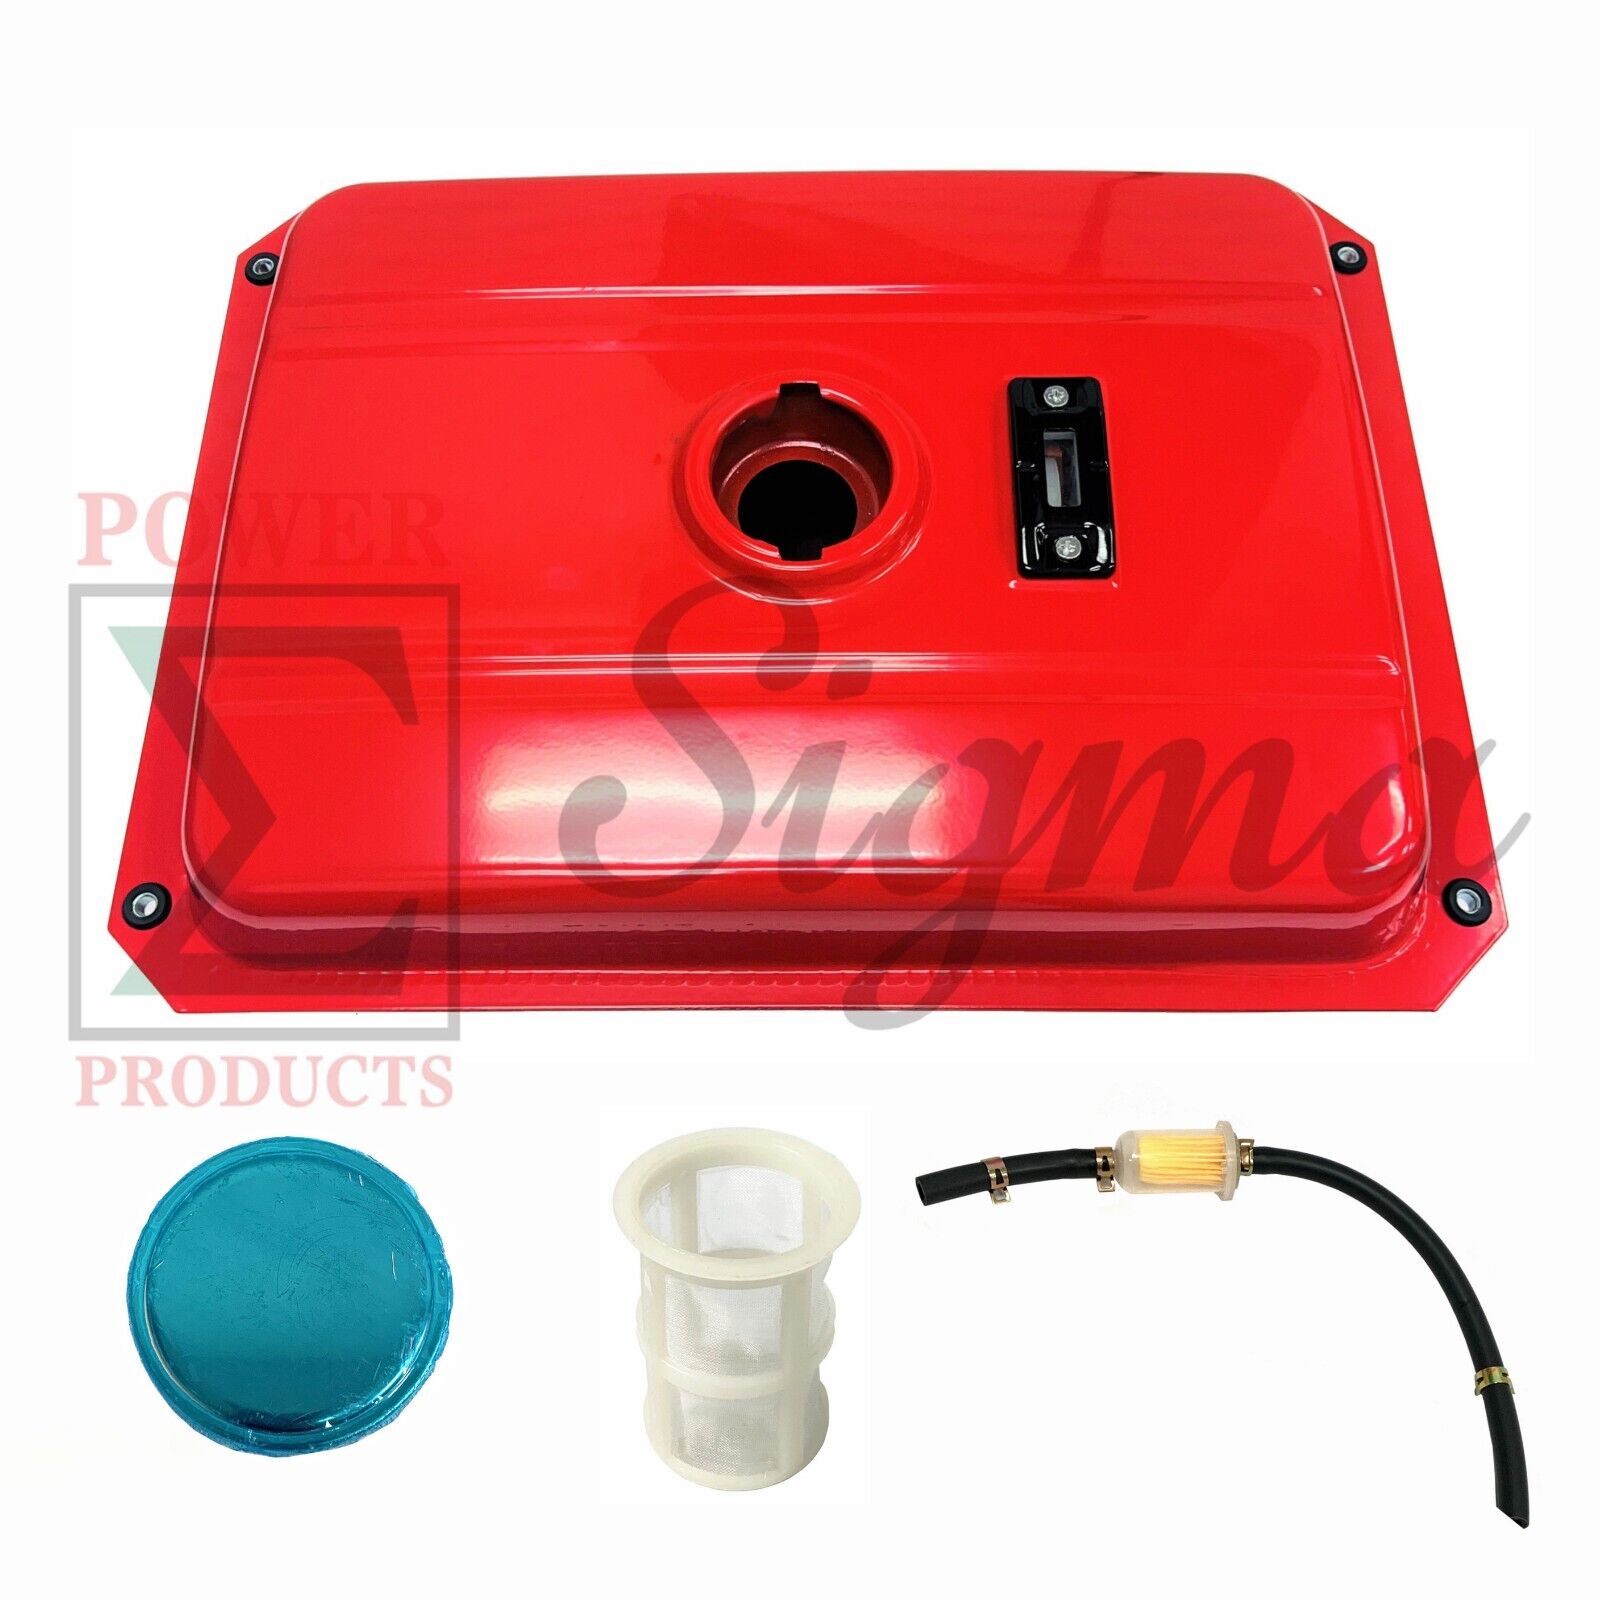 New 4 Gallon Red Fuel Tank Fits Most Open Frame 5-7KW Diesel Generator